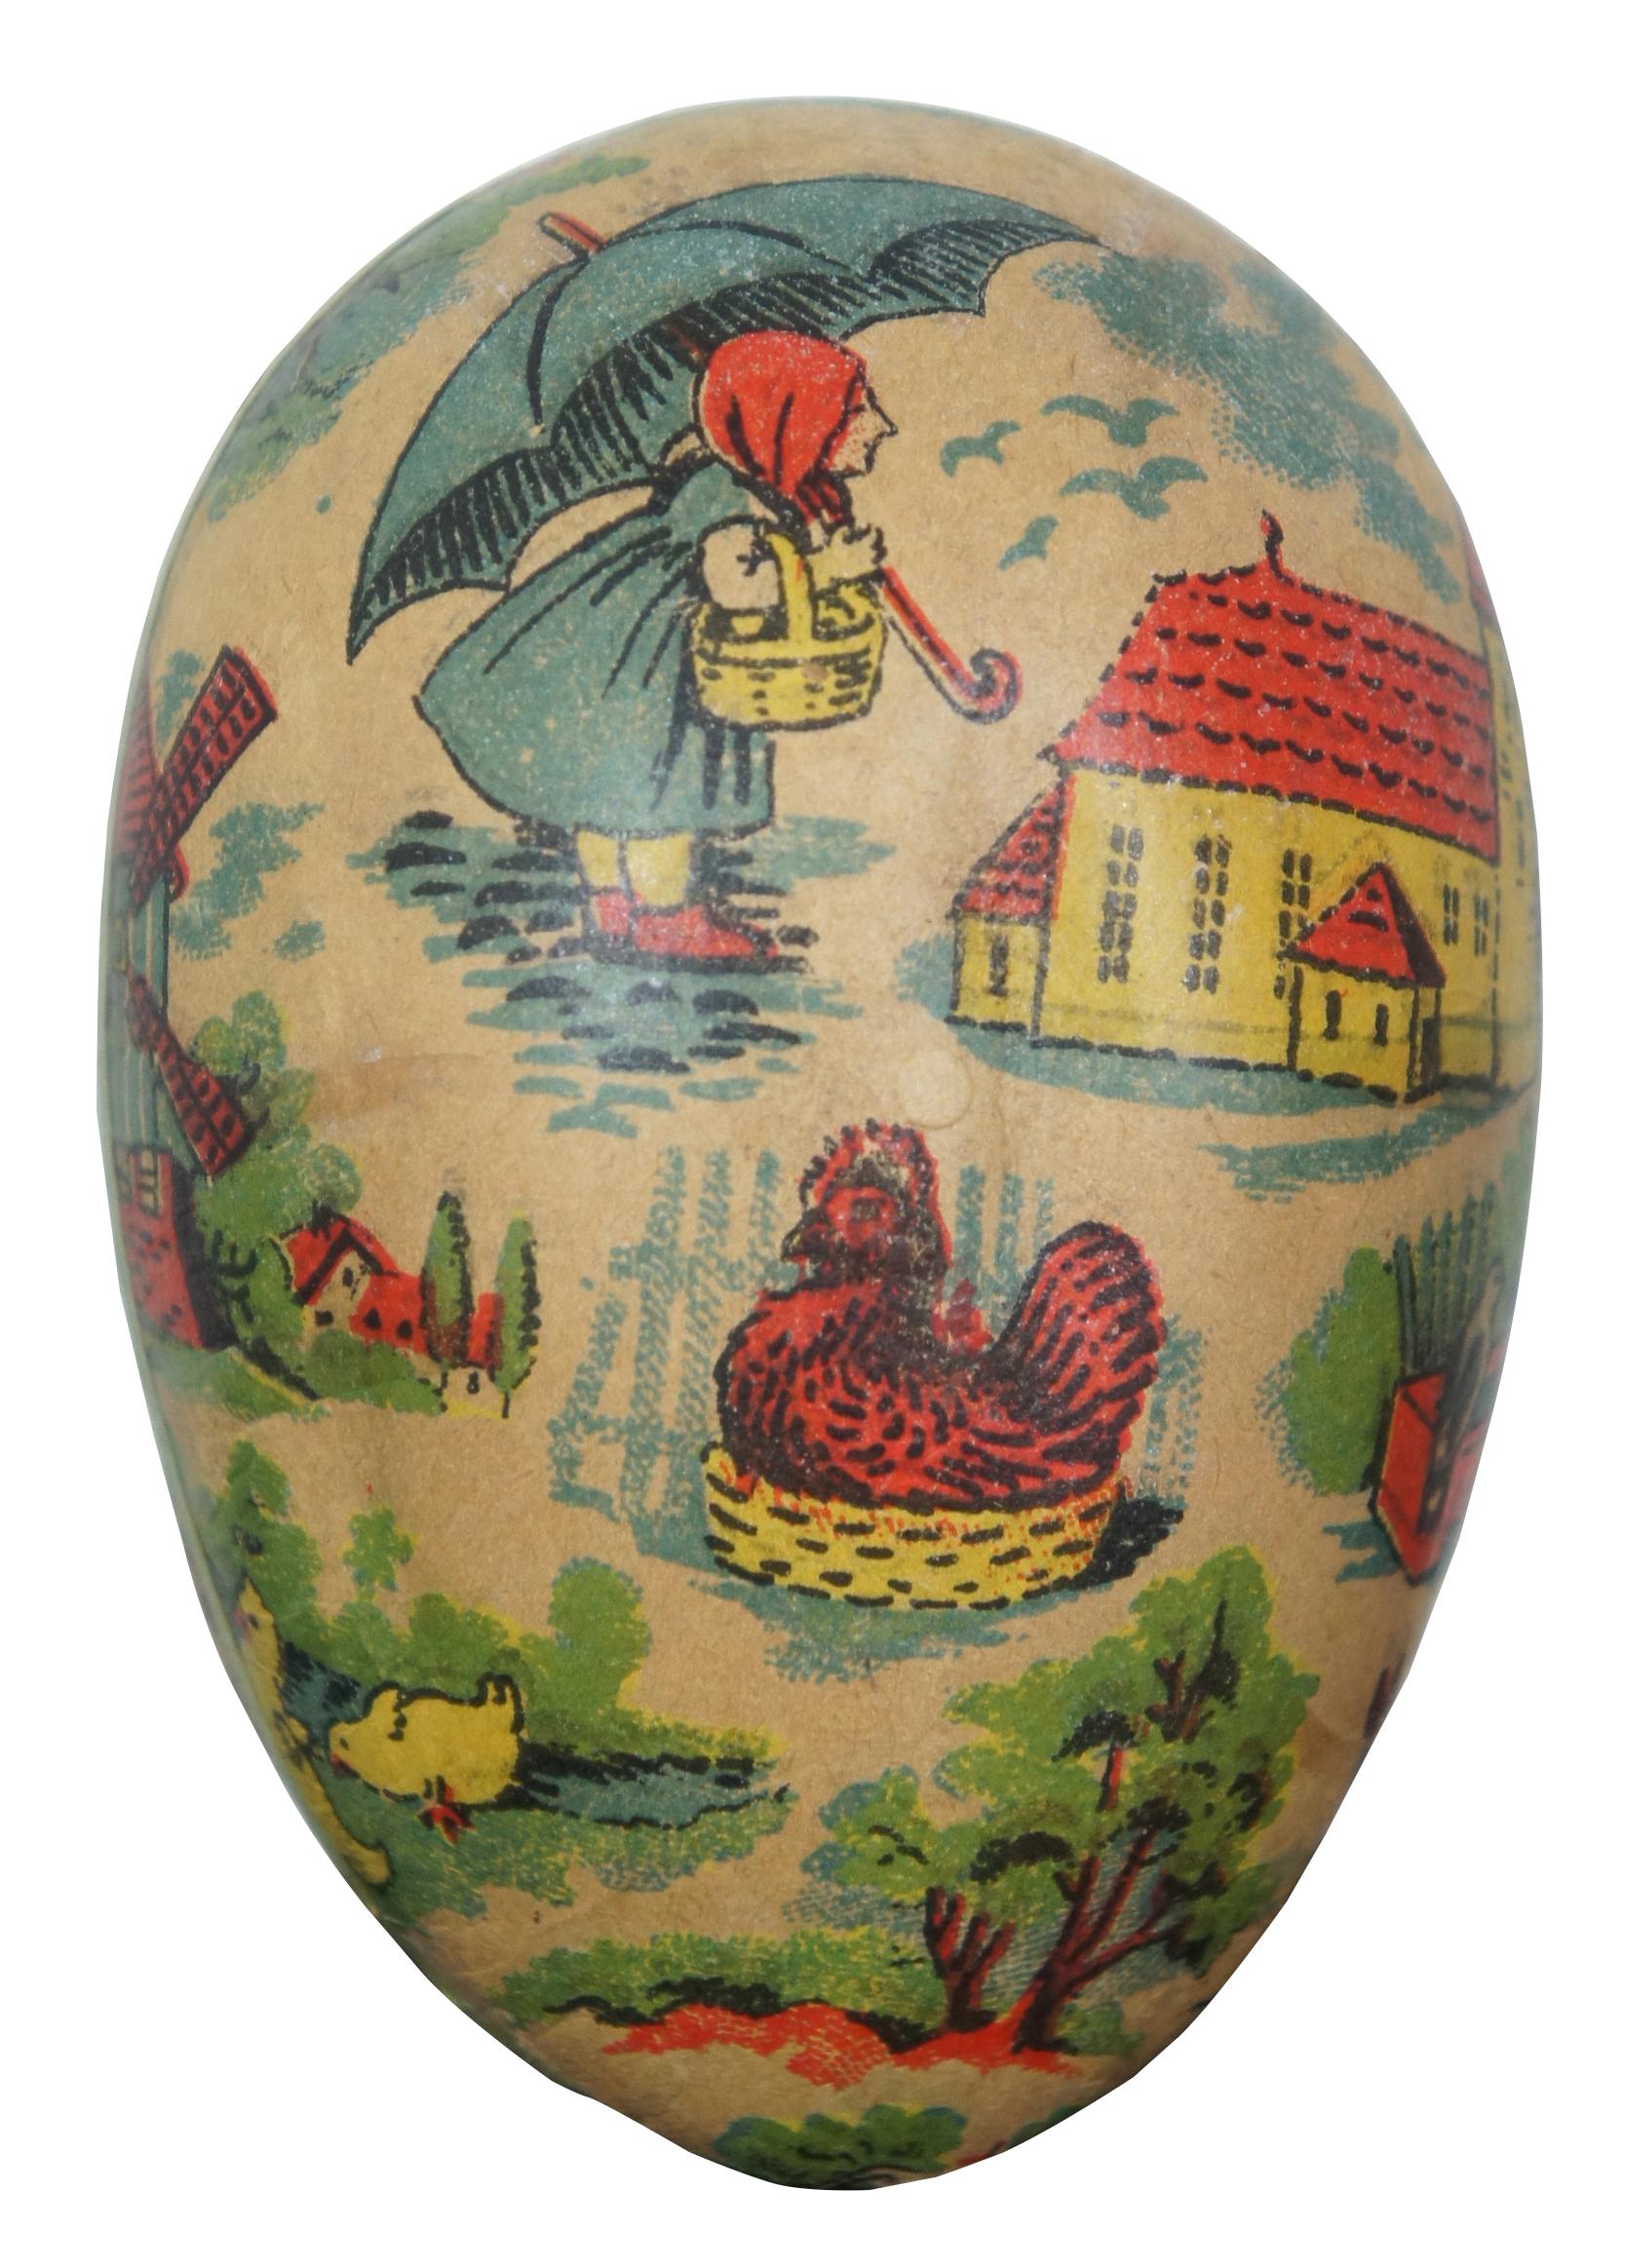 Antique German papier mâché Easter egg candy container, featuring an assortment of lithograph images in a storybook style including houses, a girl with an umbrella, a windmill, animals, a hen in a basket and an anthropomorphic rabbit. Measure: 3